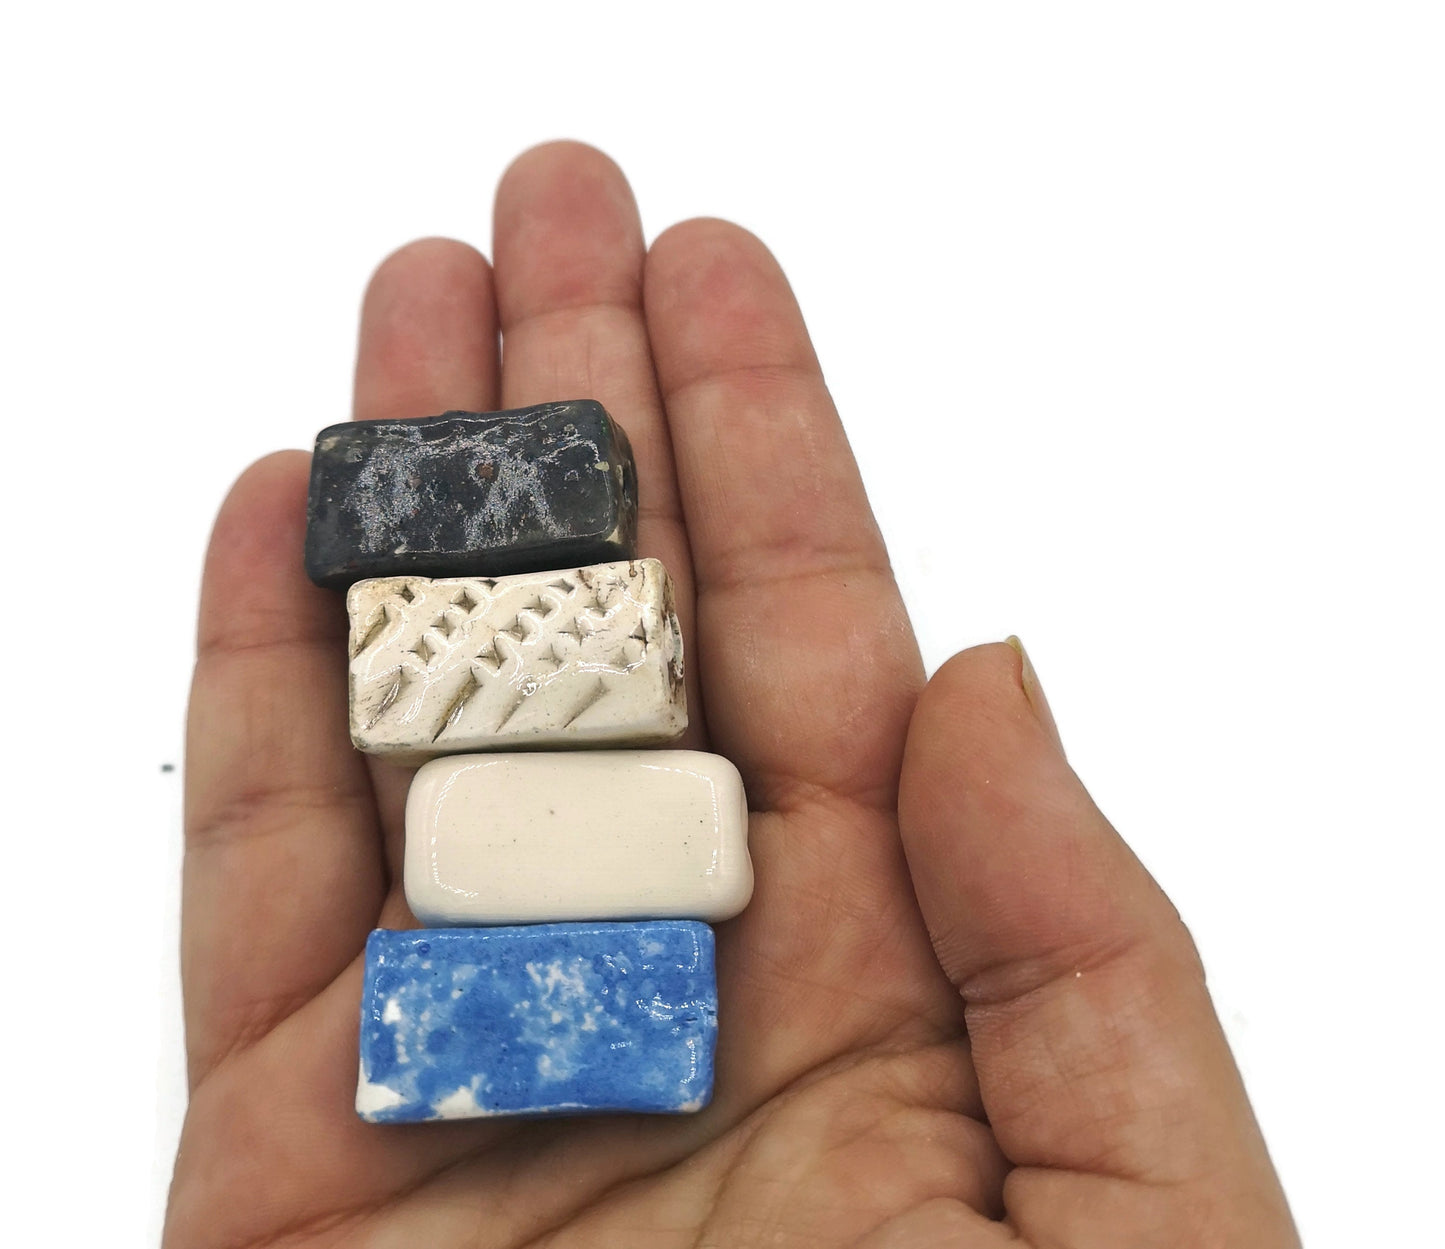 LARGE RECTANGULAR BEADS, Mixed Set of 4 Ceramic Beads For Jewelry Making, Rectangle Tile Beads 2mm Hole Clay Beads For Macrame - Ceramica Ana Rafael